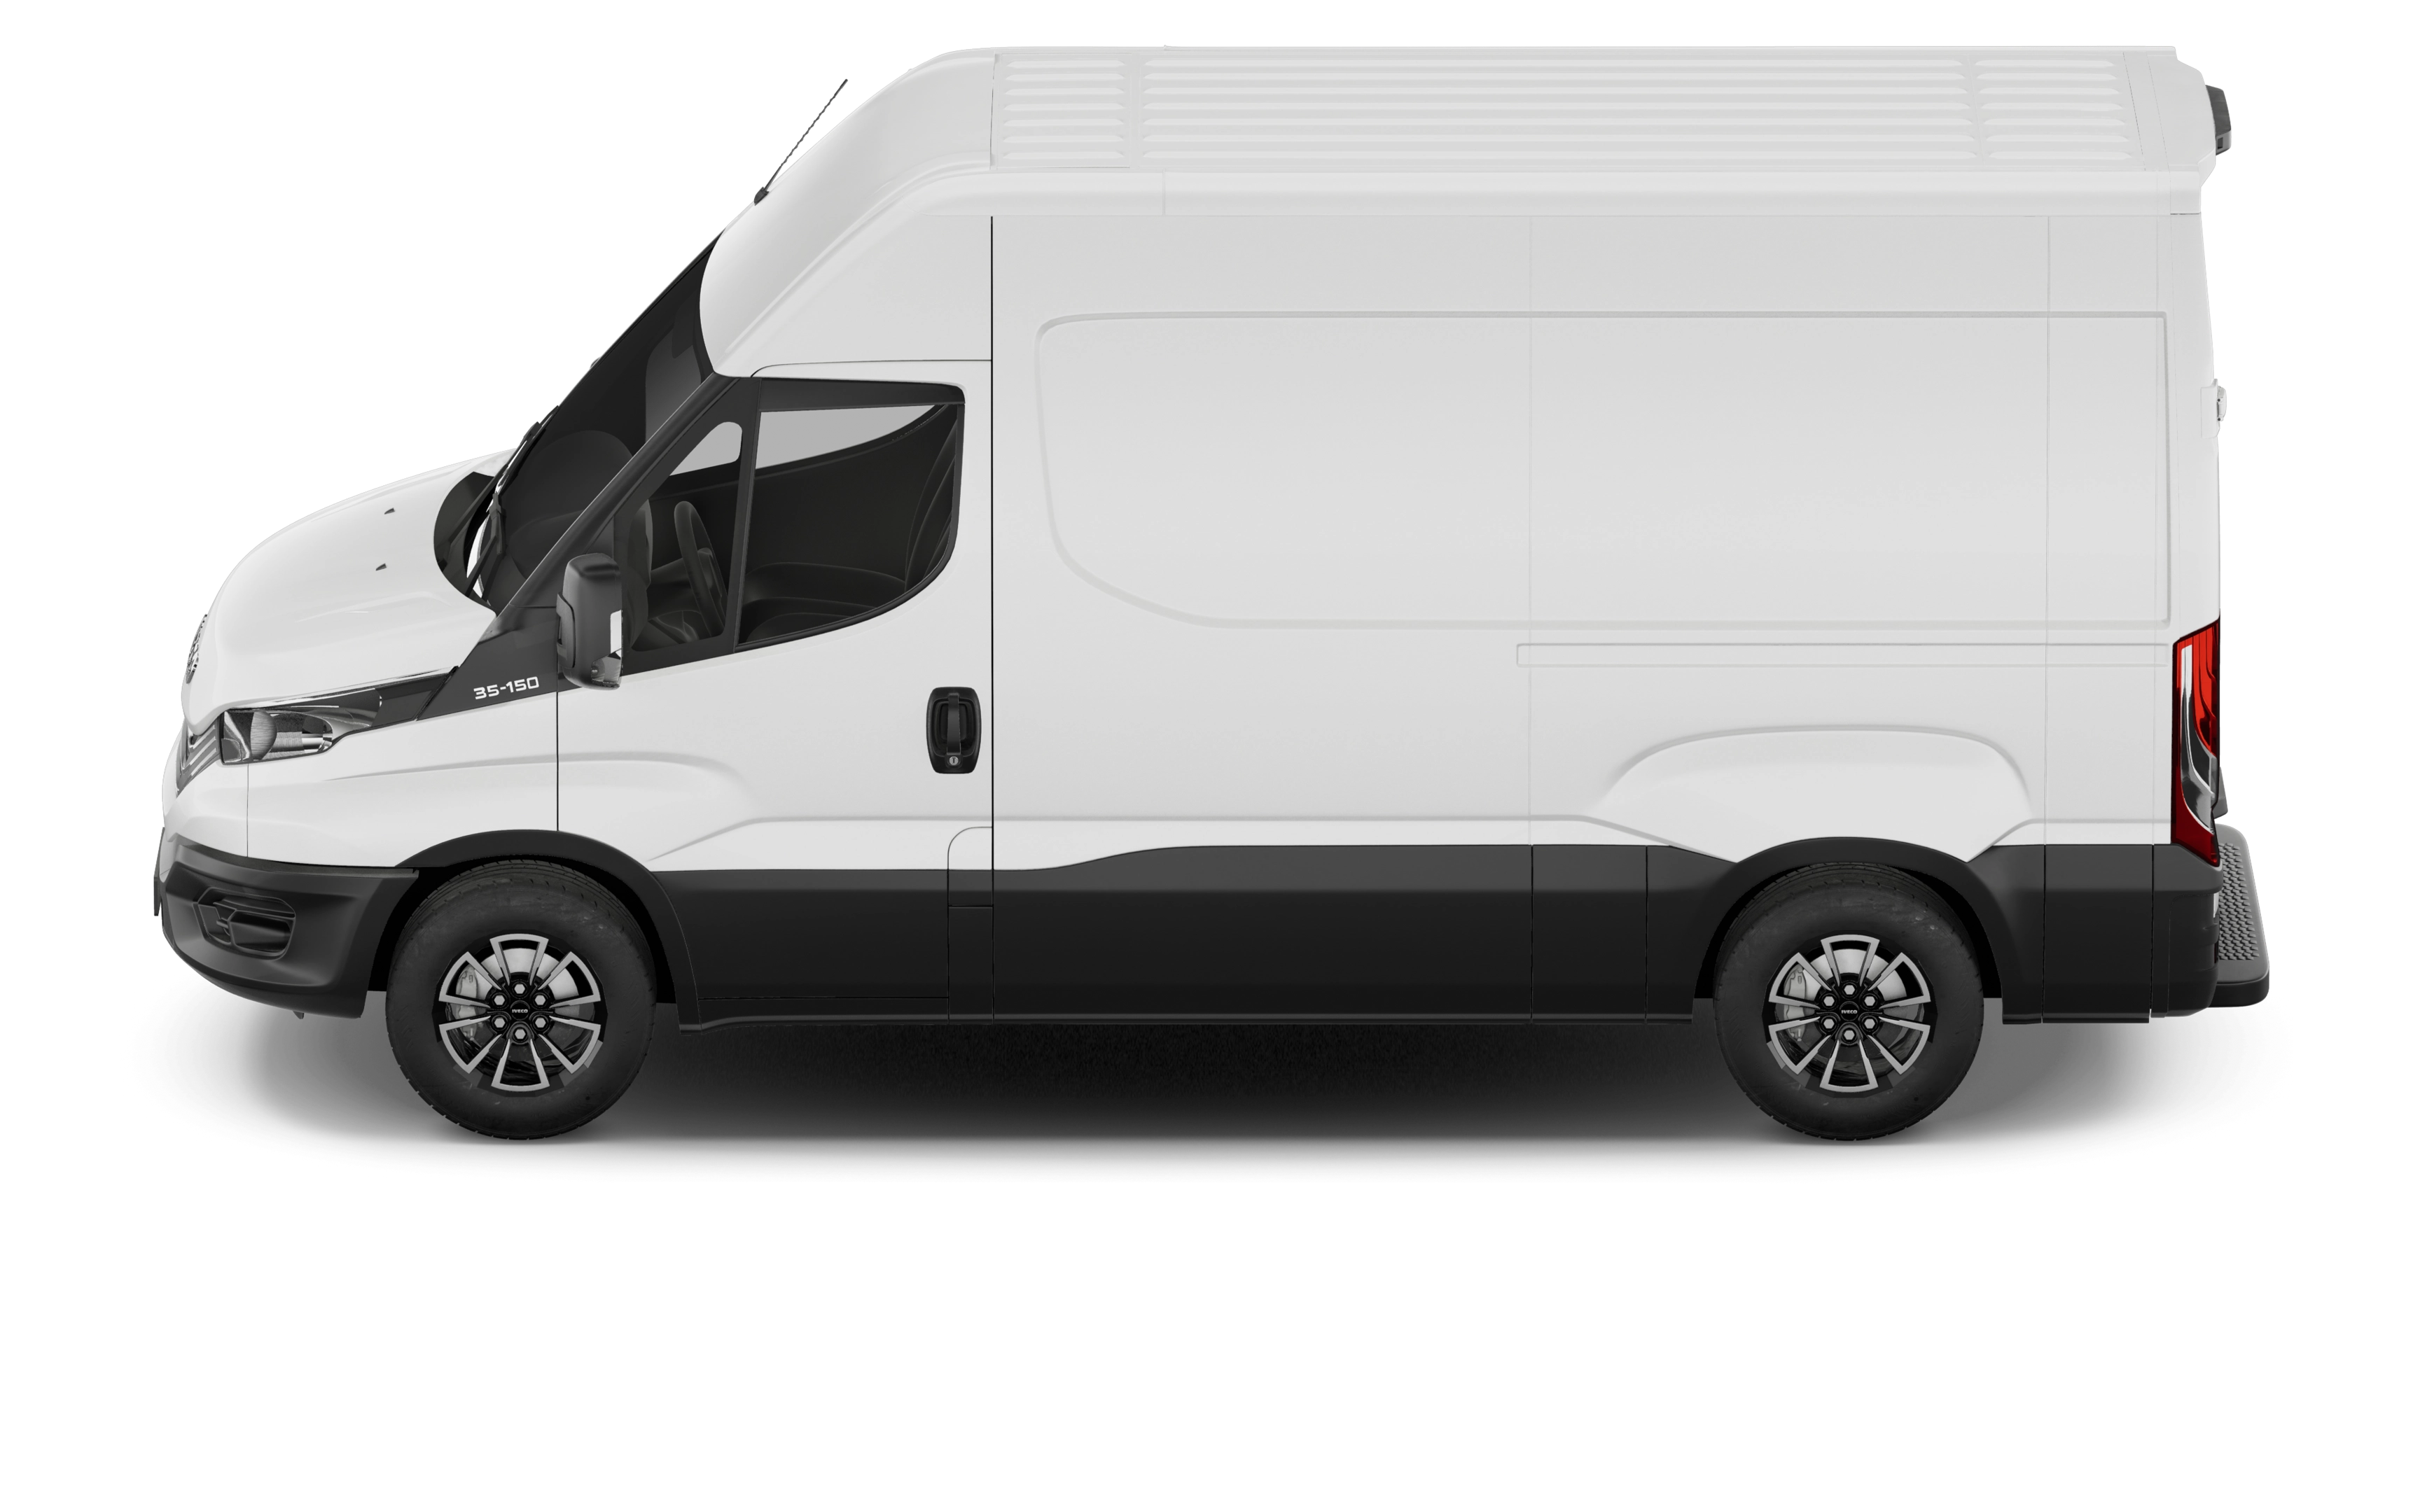 Iveco edaily 35s14 electric 140kw 74kwh high roof van 3520 wb auto [22kw]